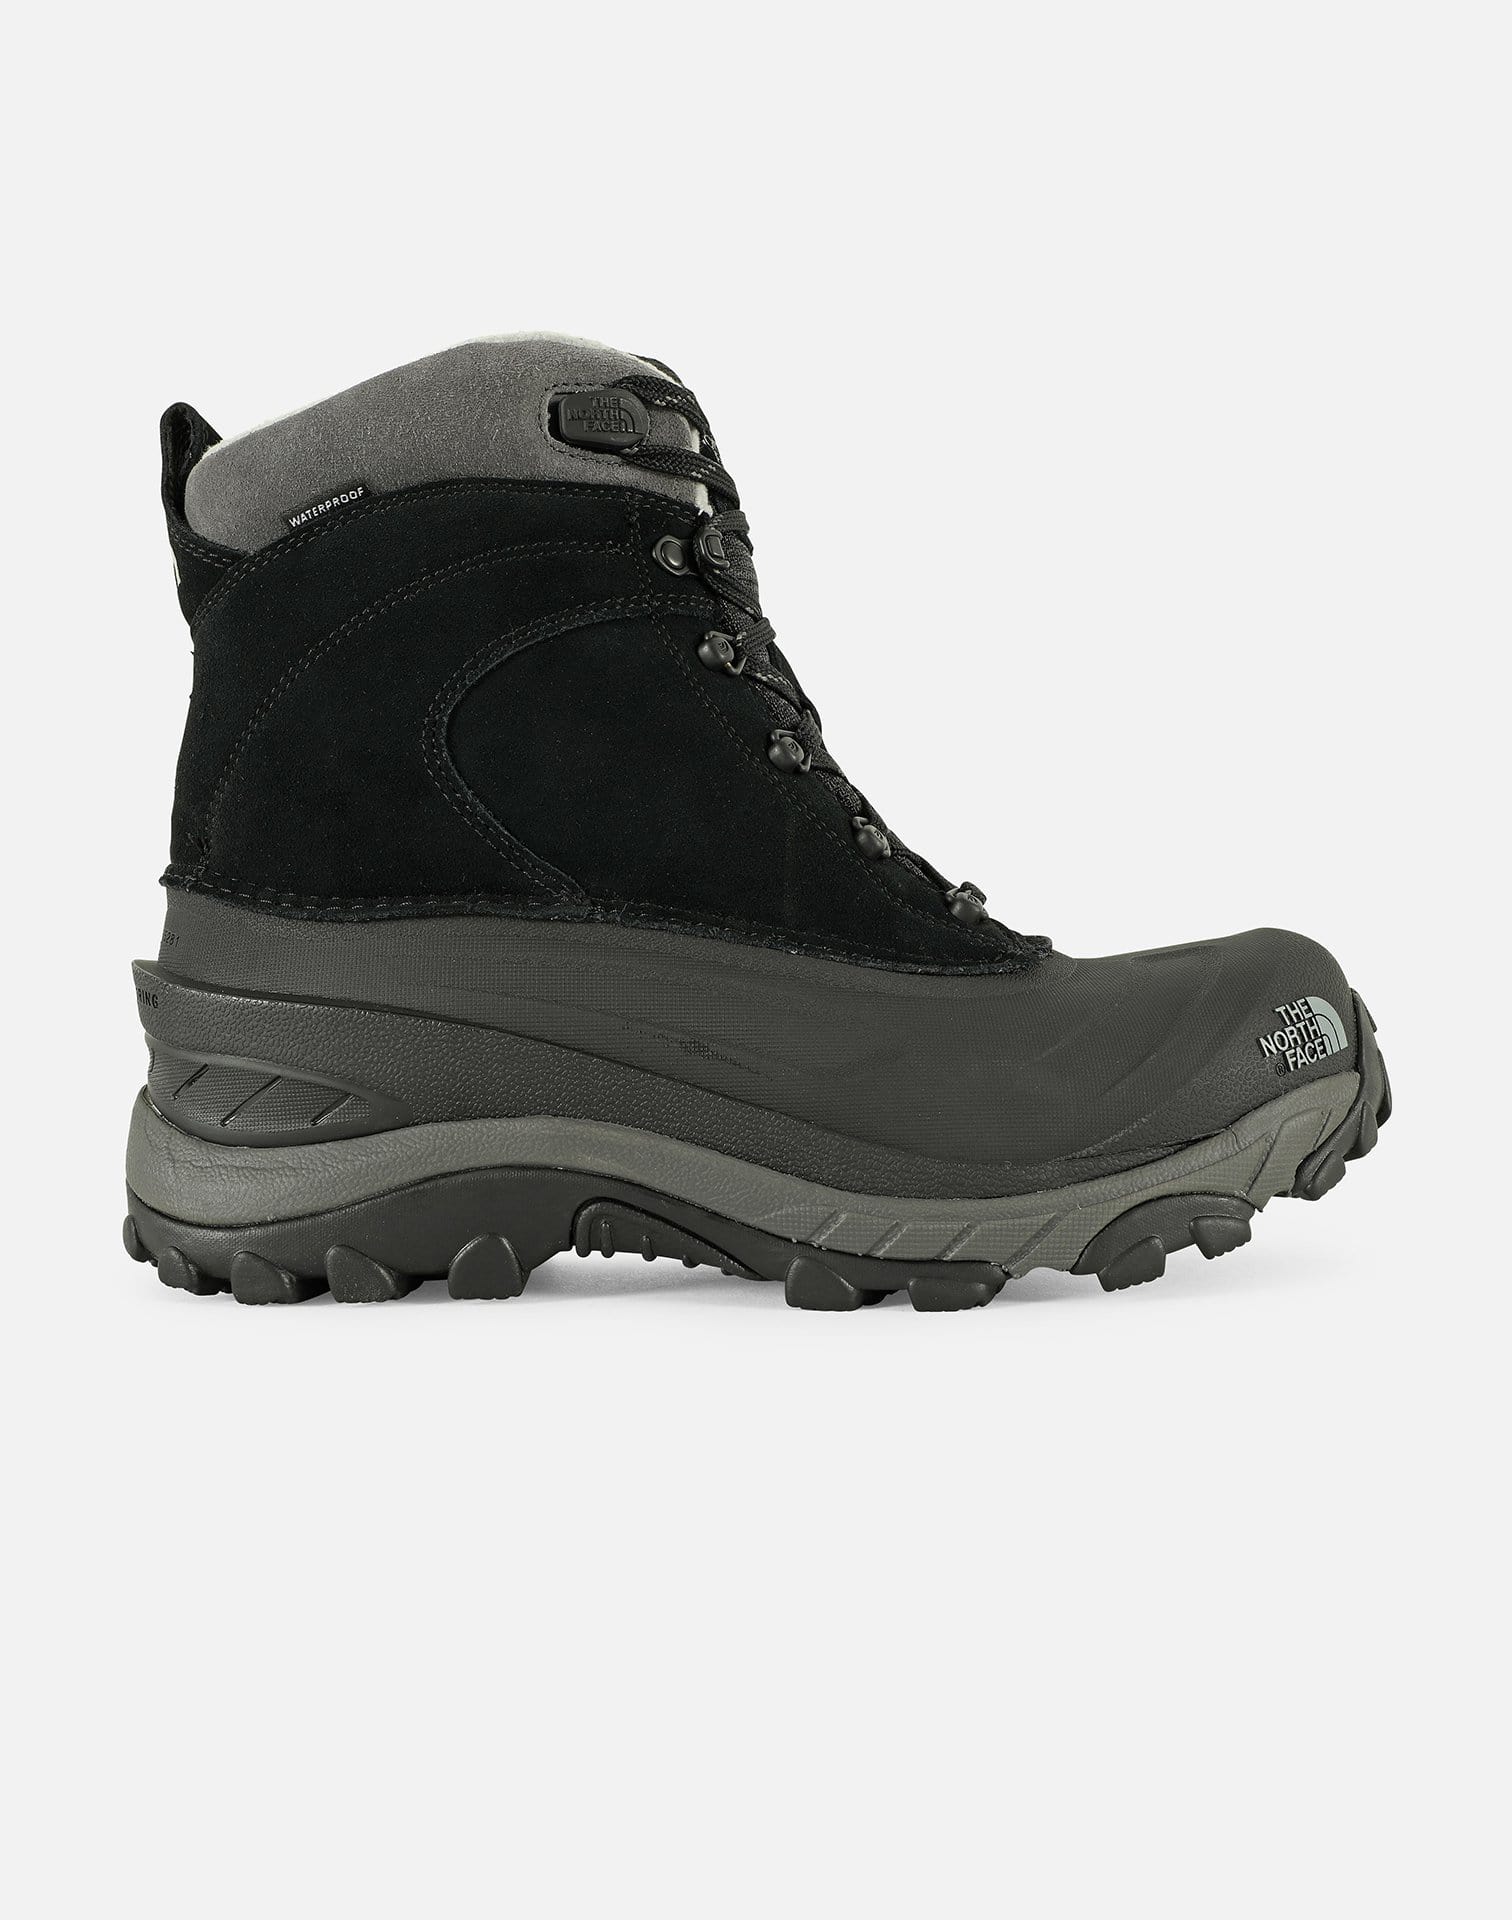 The North Face Men's Chilkat III Boots